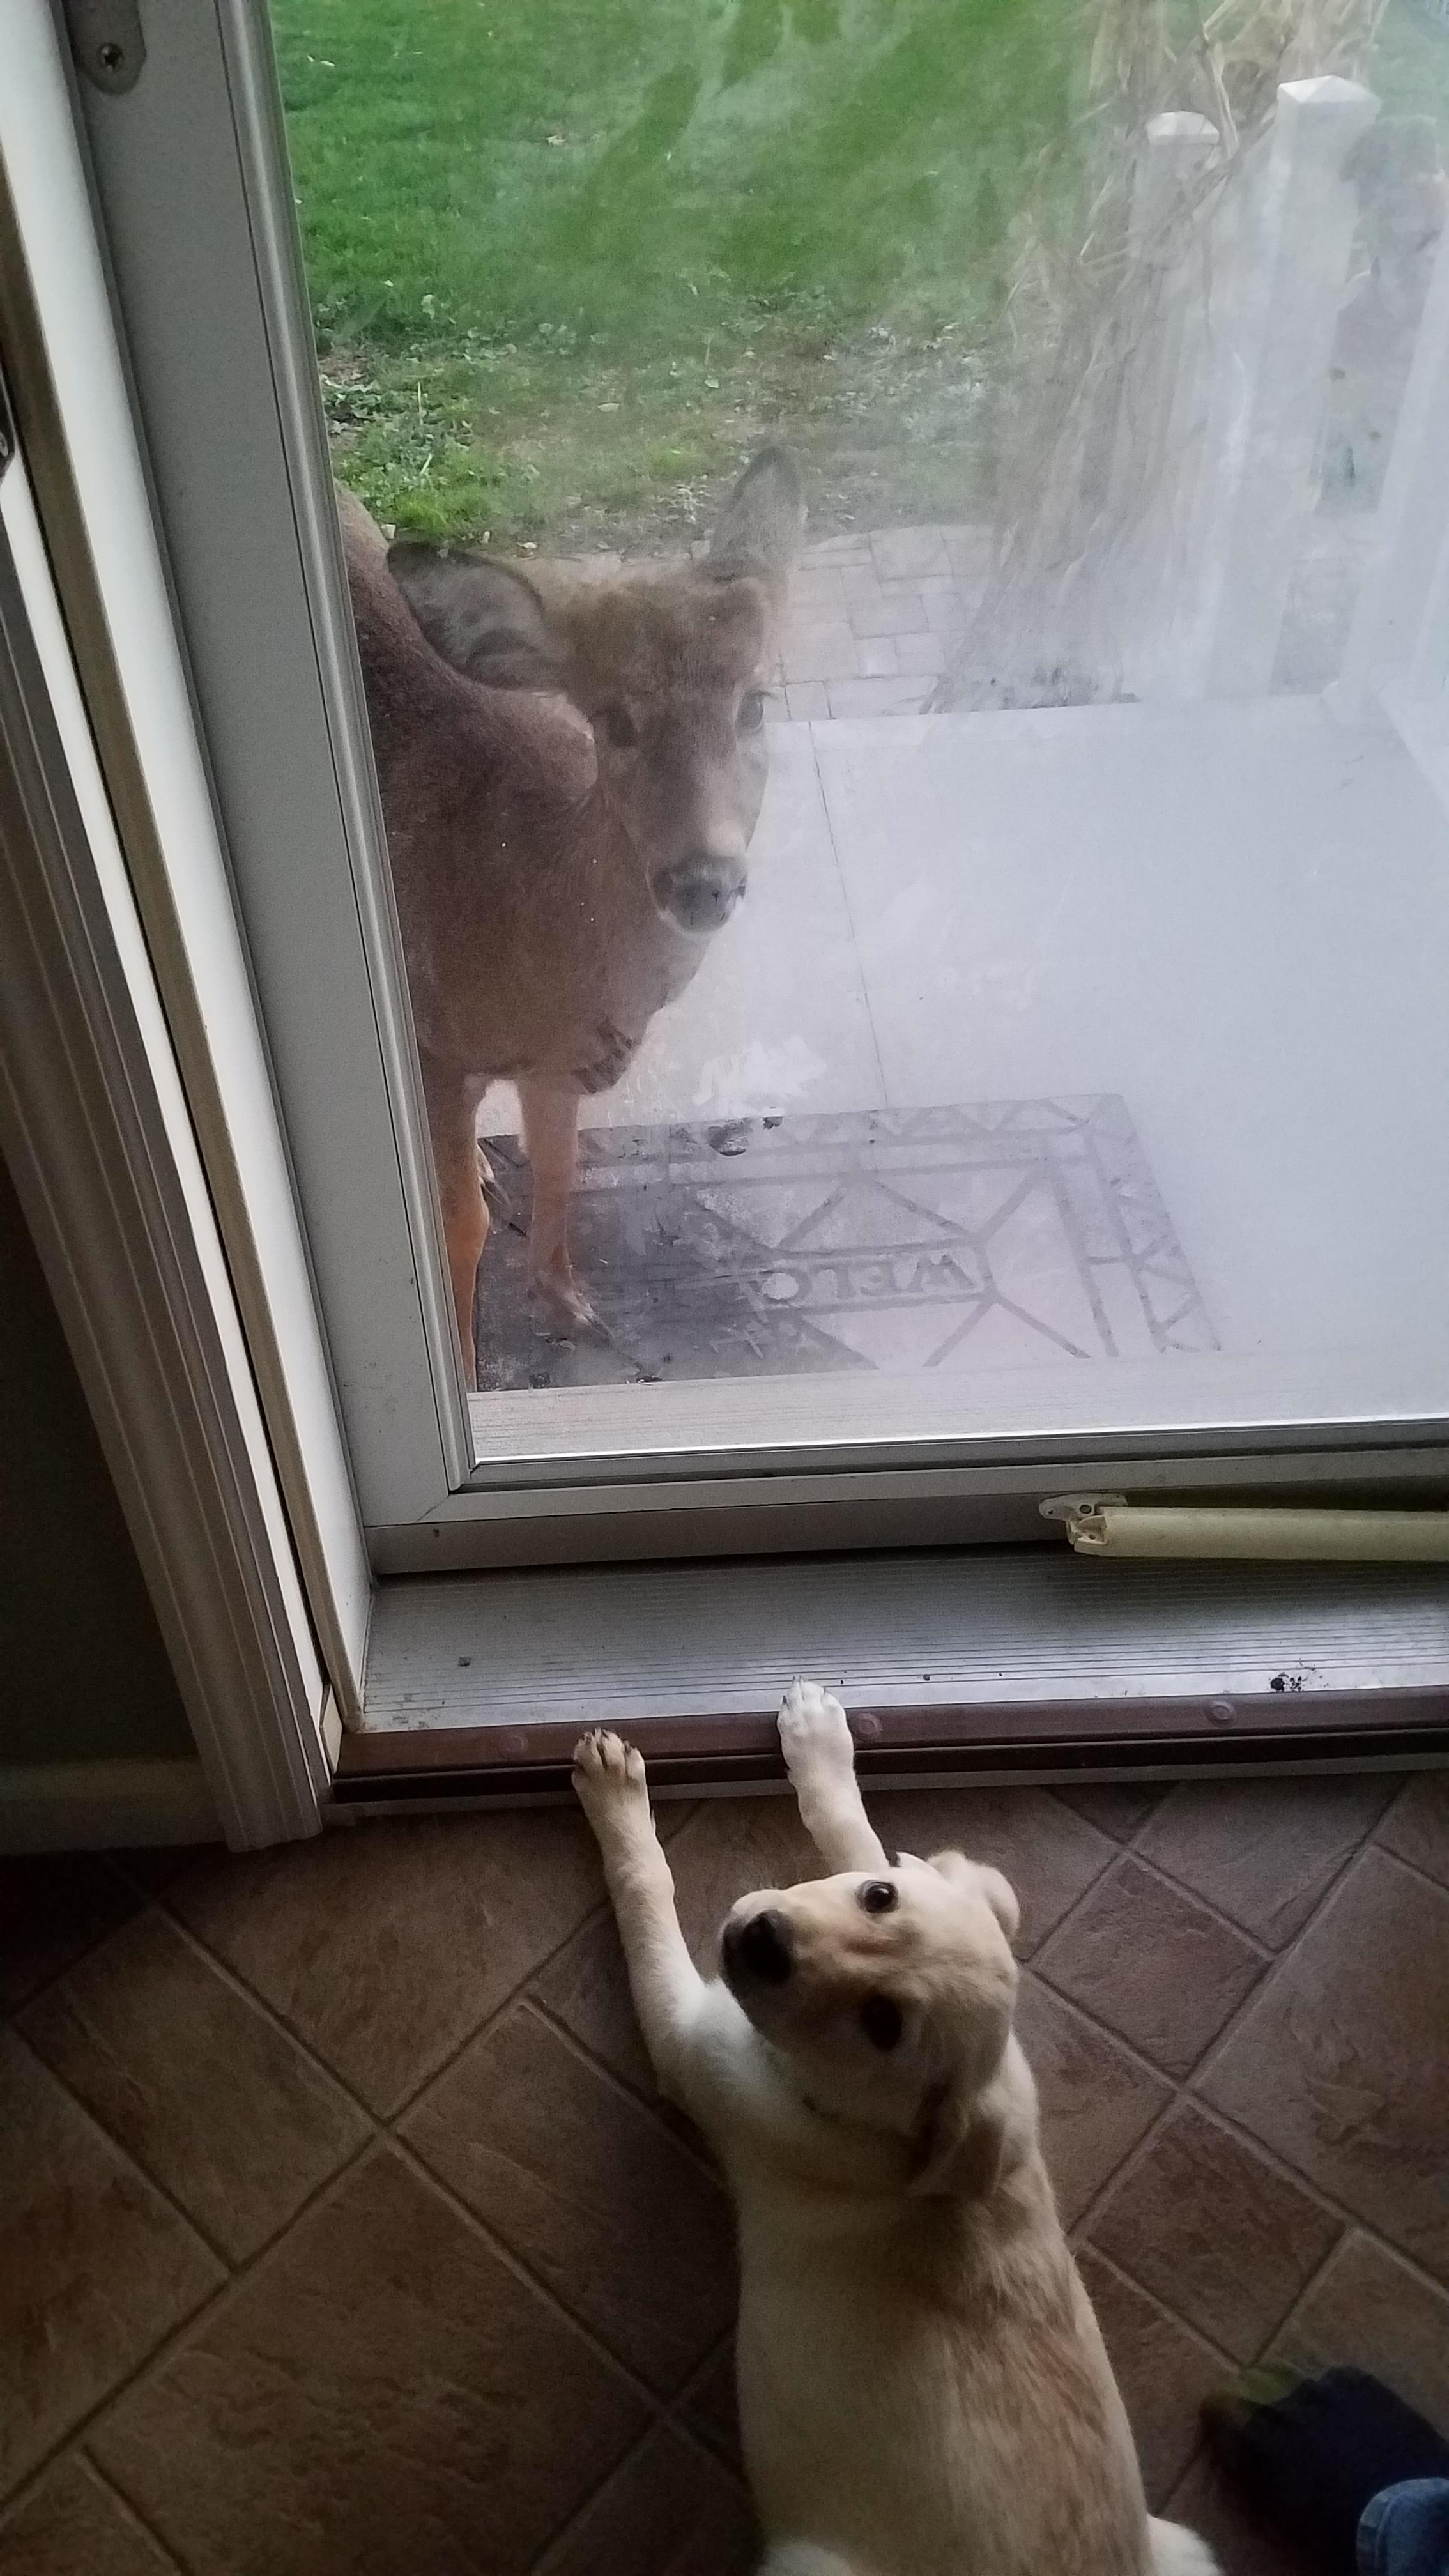 The little dears survived the storm, and their supposed leader came back many times. He is probably friends with the dog. Cheers little deer.